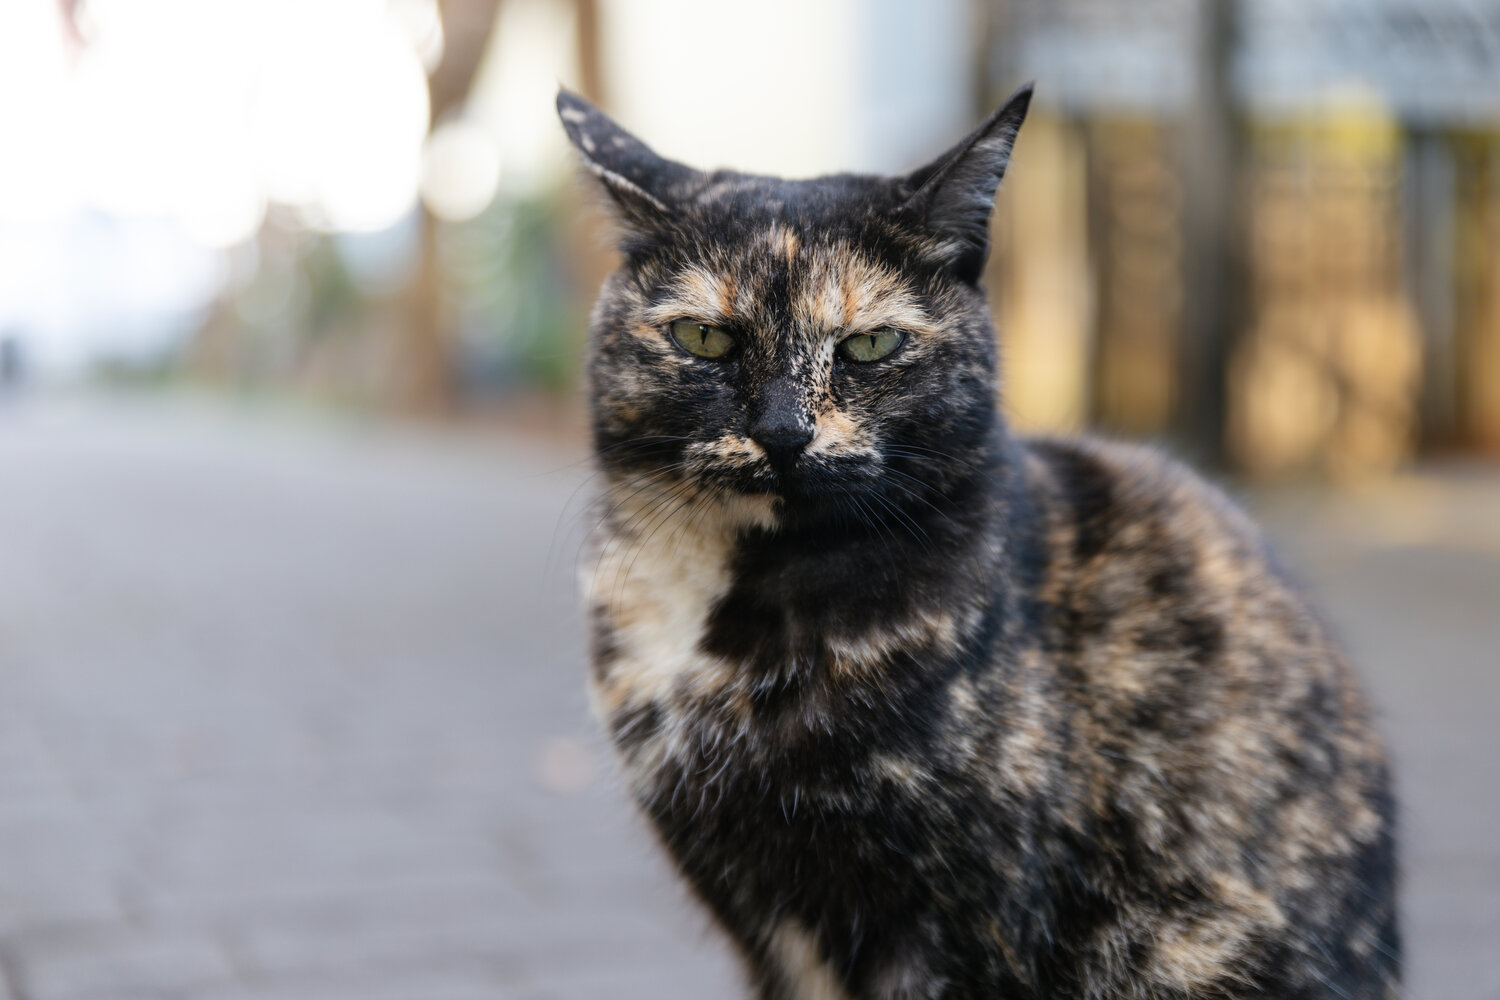 To ensure that this community cat is taken care of, The Happy Olive started a Marble Fund, giving customers the opportunity to put money towards the care of this tailless feline.